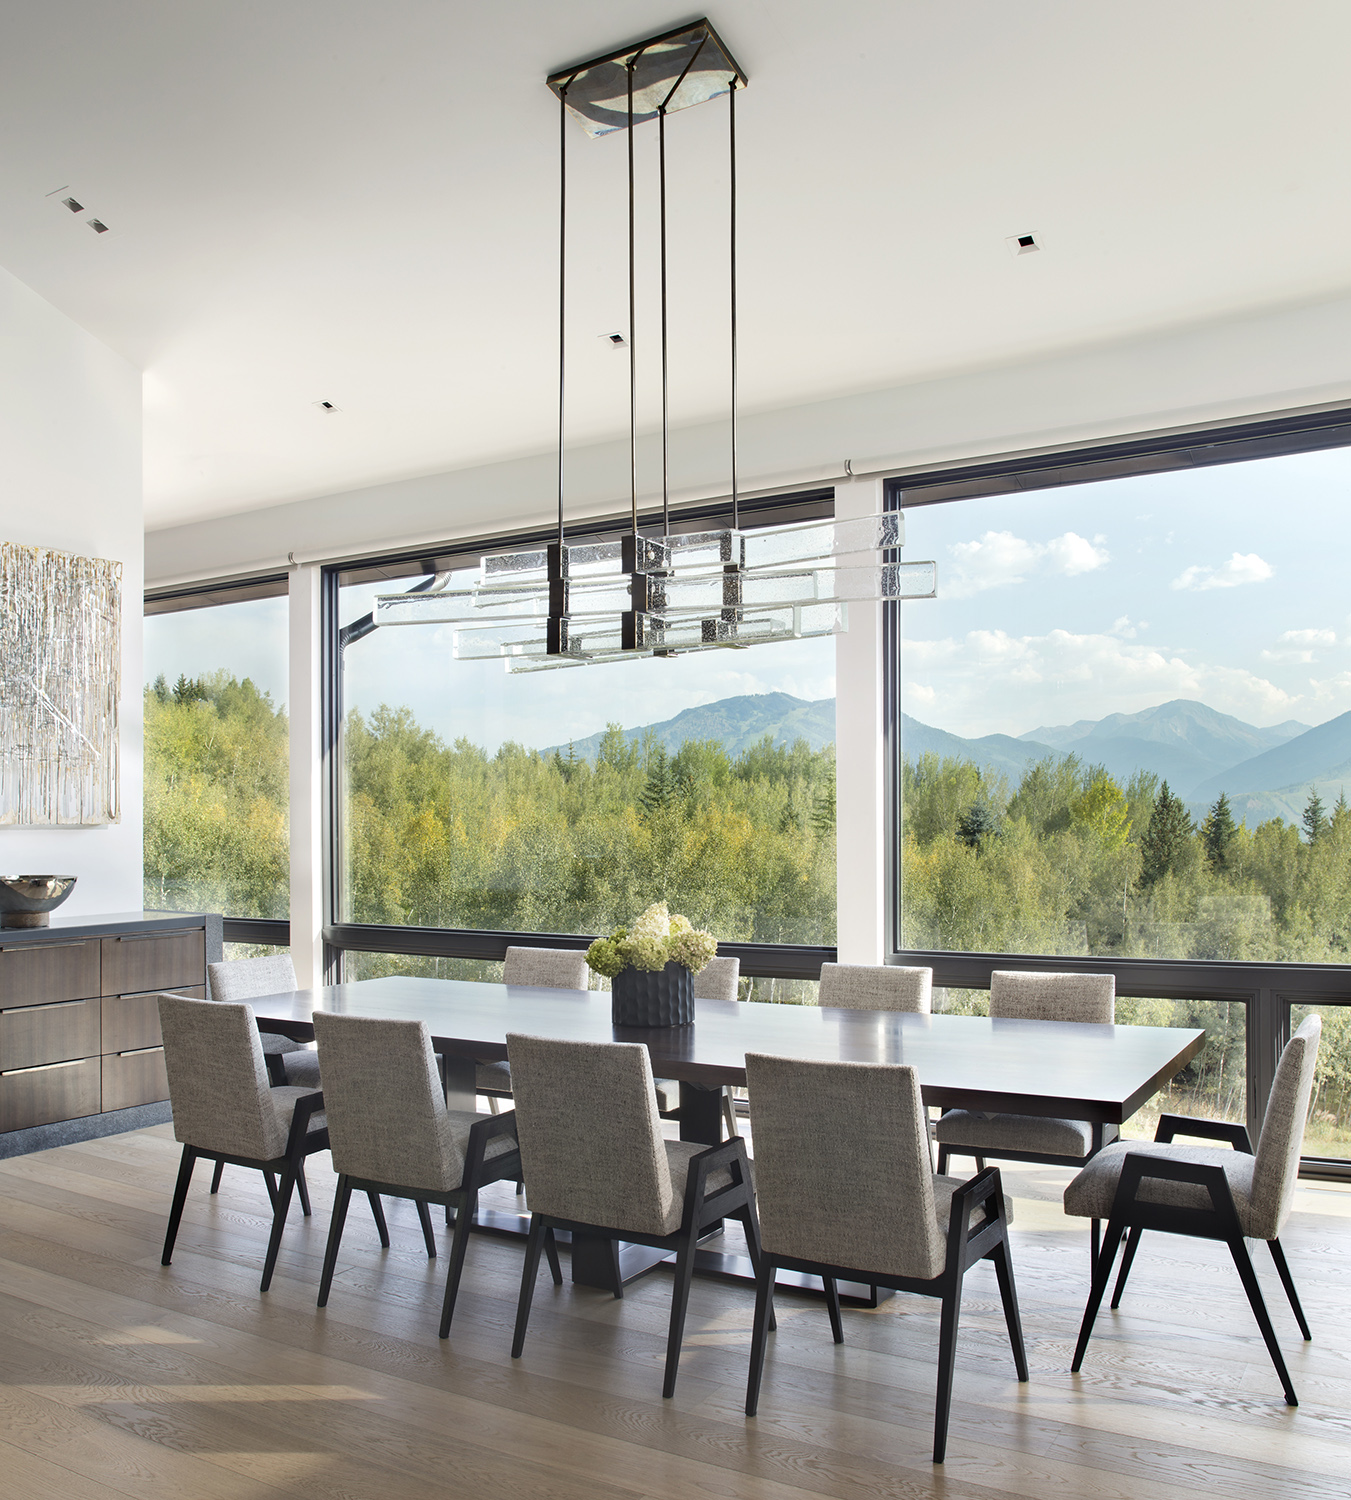 Dinning Room interior design of the lookout house